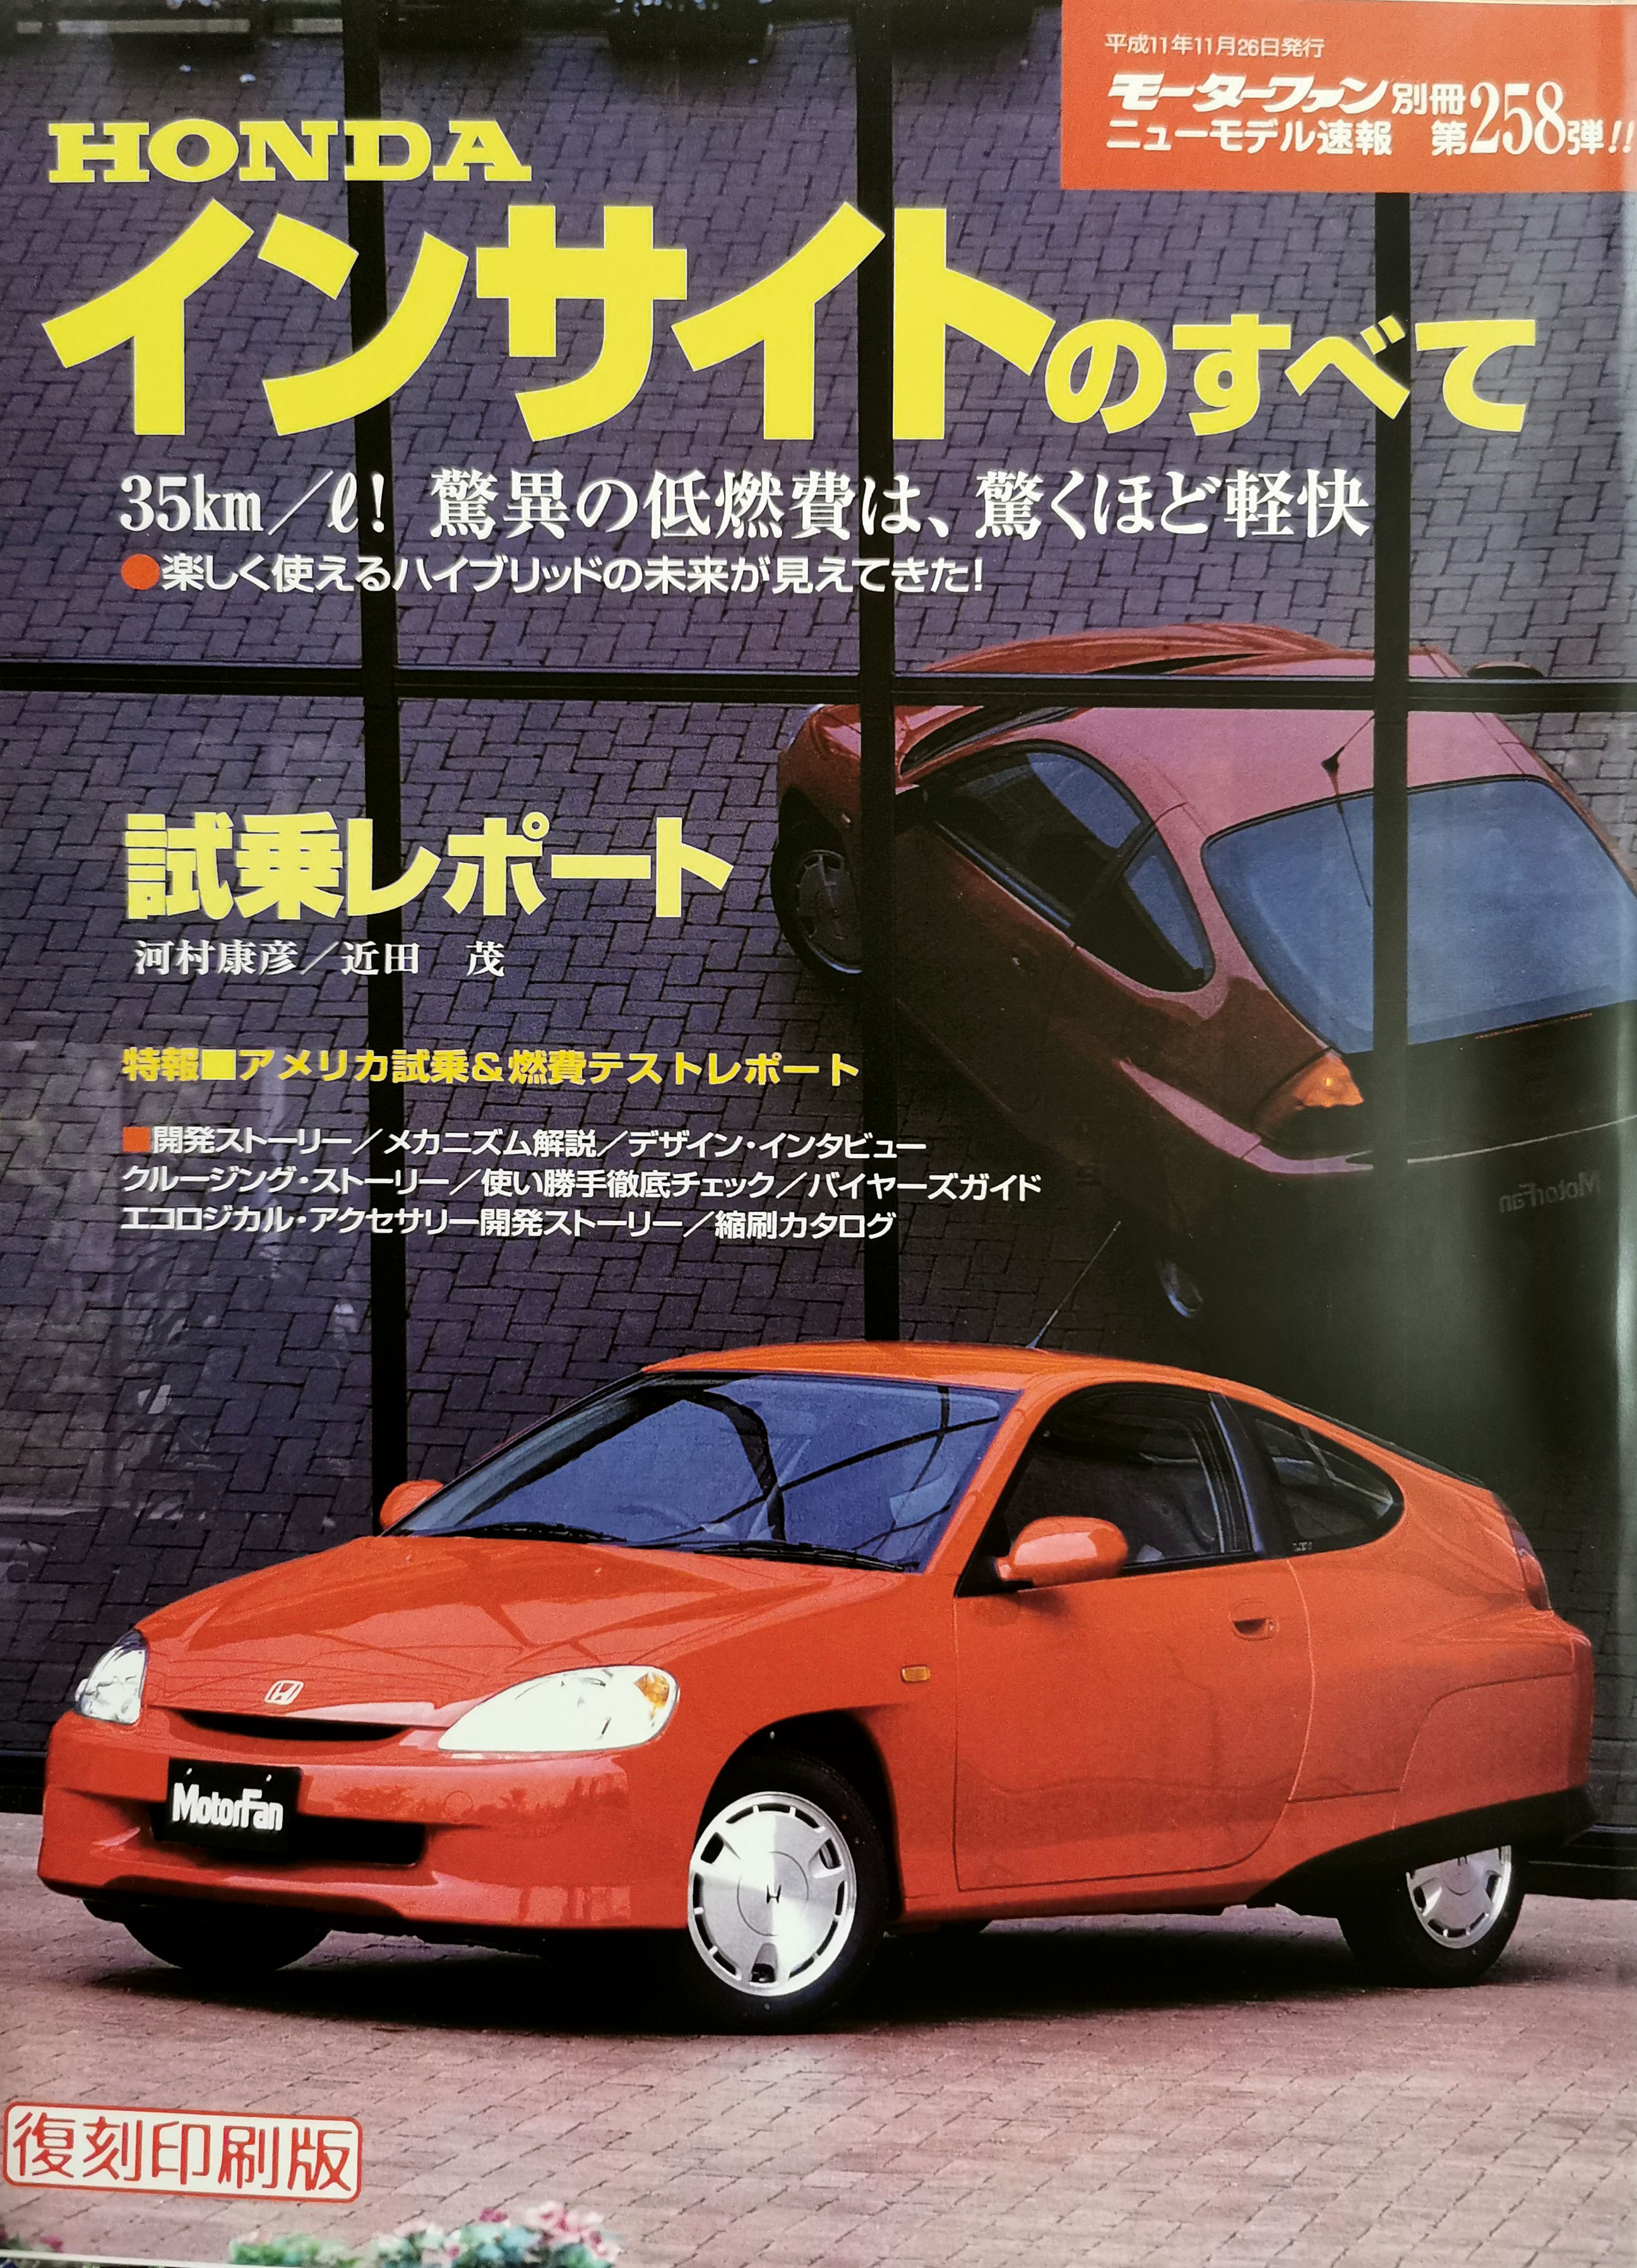 Why I Love the Automotive Section in Japanese Bookstores